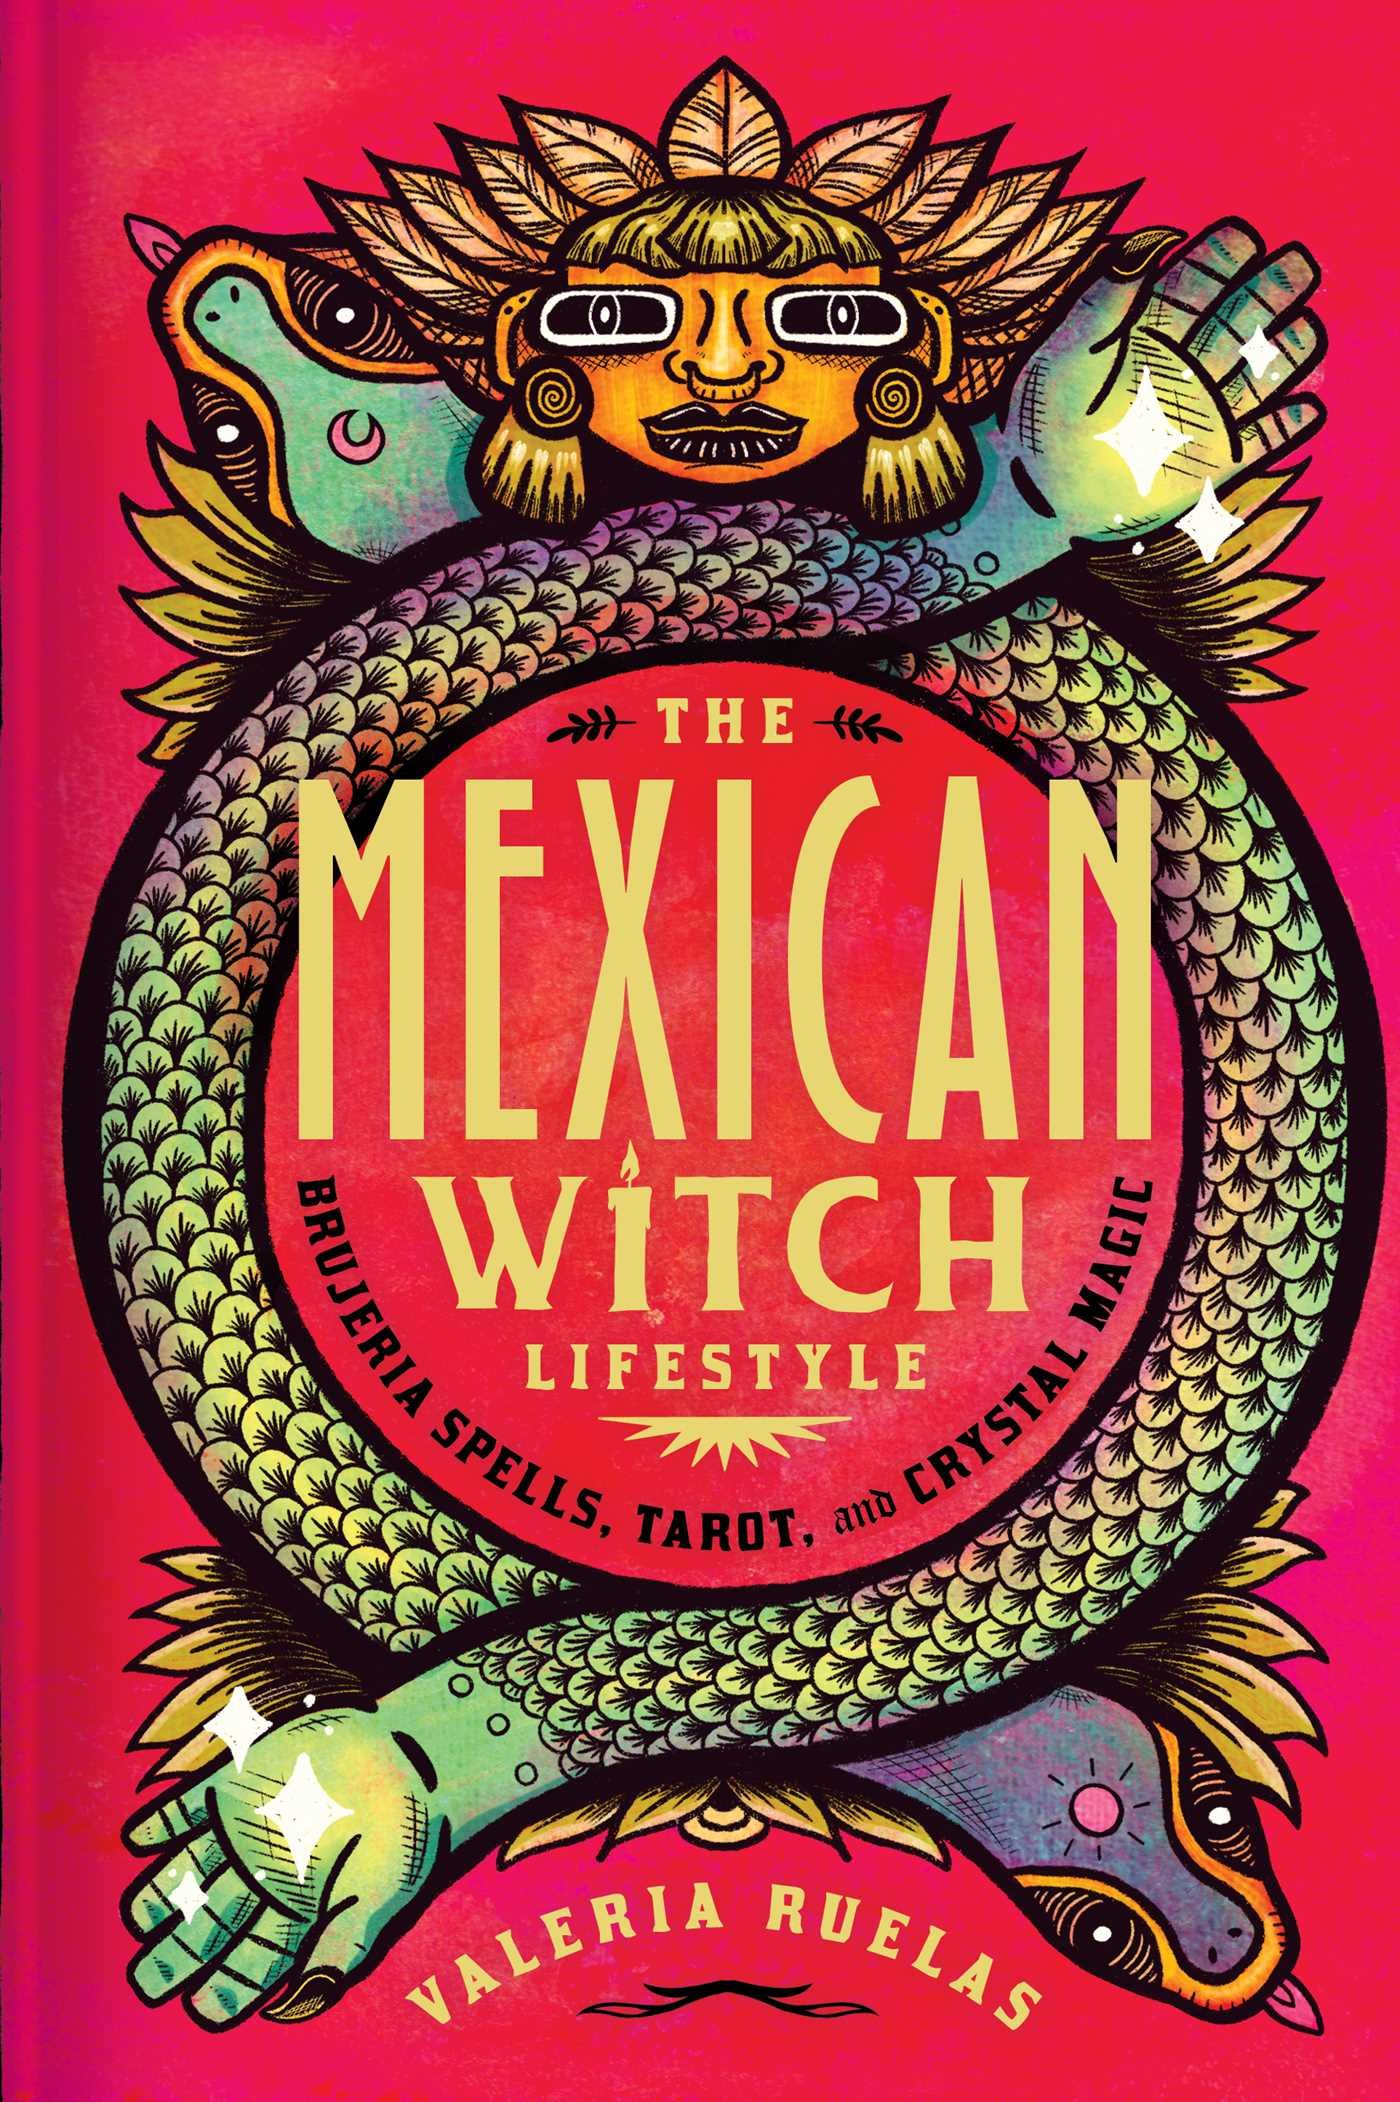 The Mexican Witch Lifestyle - book cover